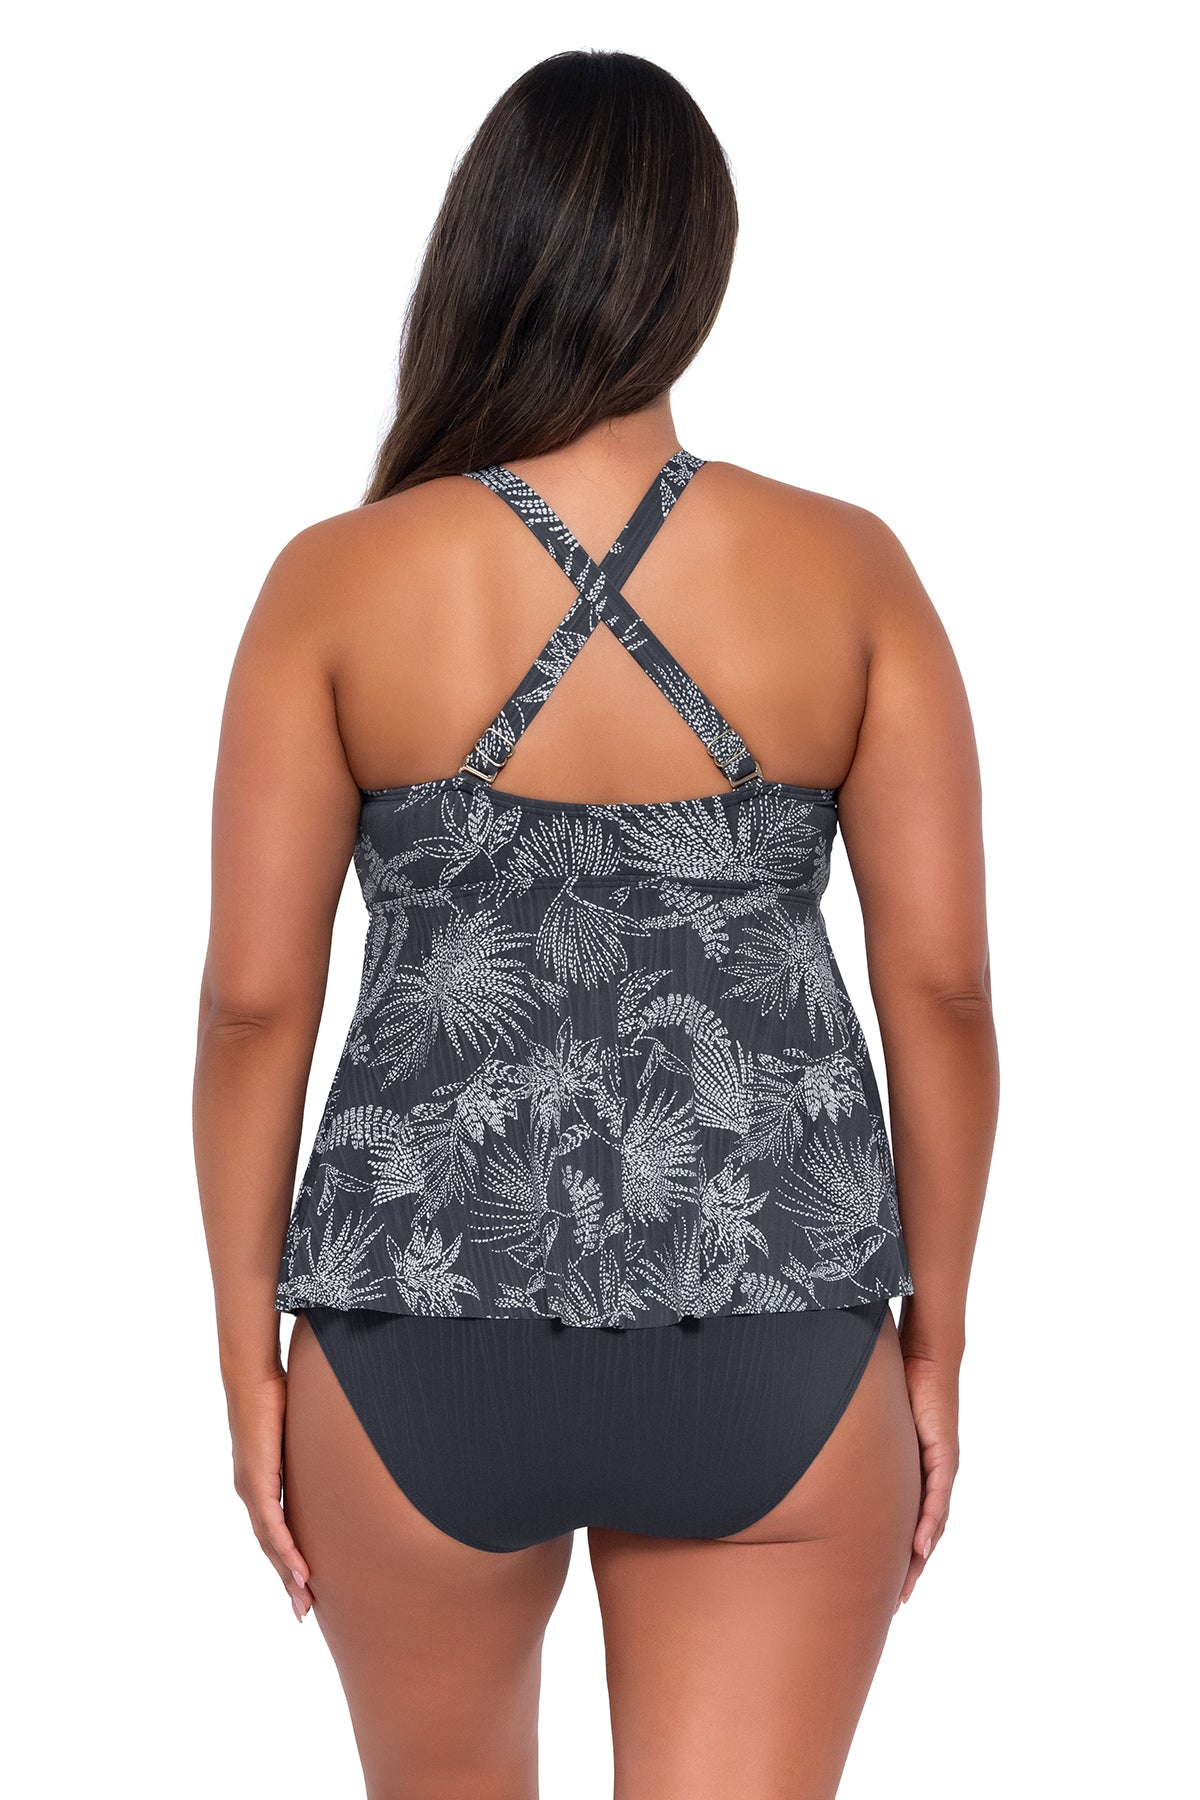 Back pose #1 of Nicky wearing Sunsets Escape Fanfare Seagrass Texture Marin Tankini Top showing crossback straps with matching Hannah High Waist bikini bottom